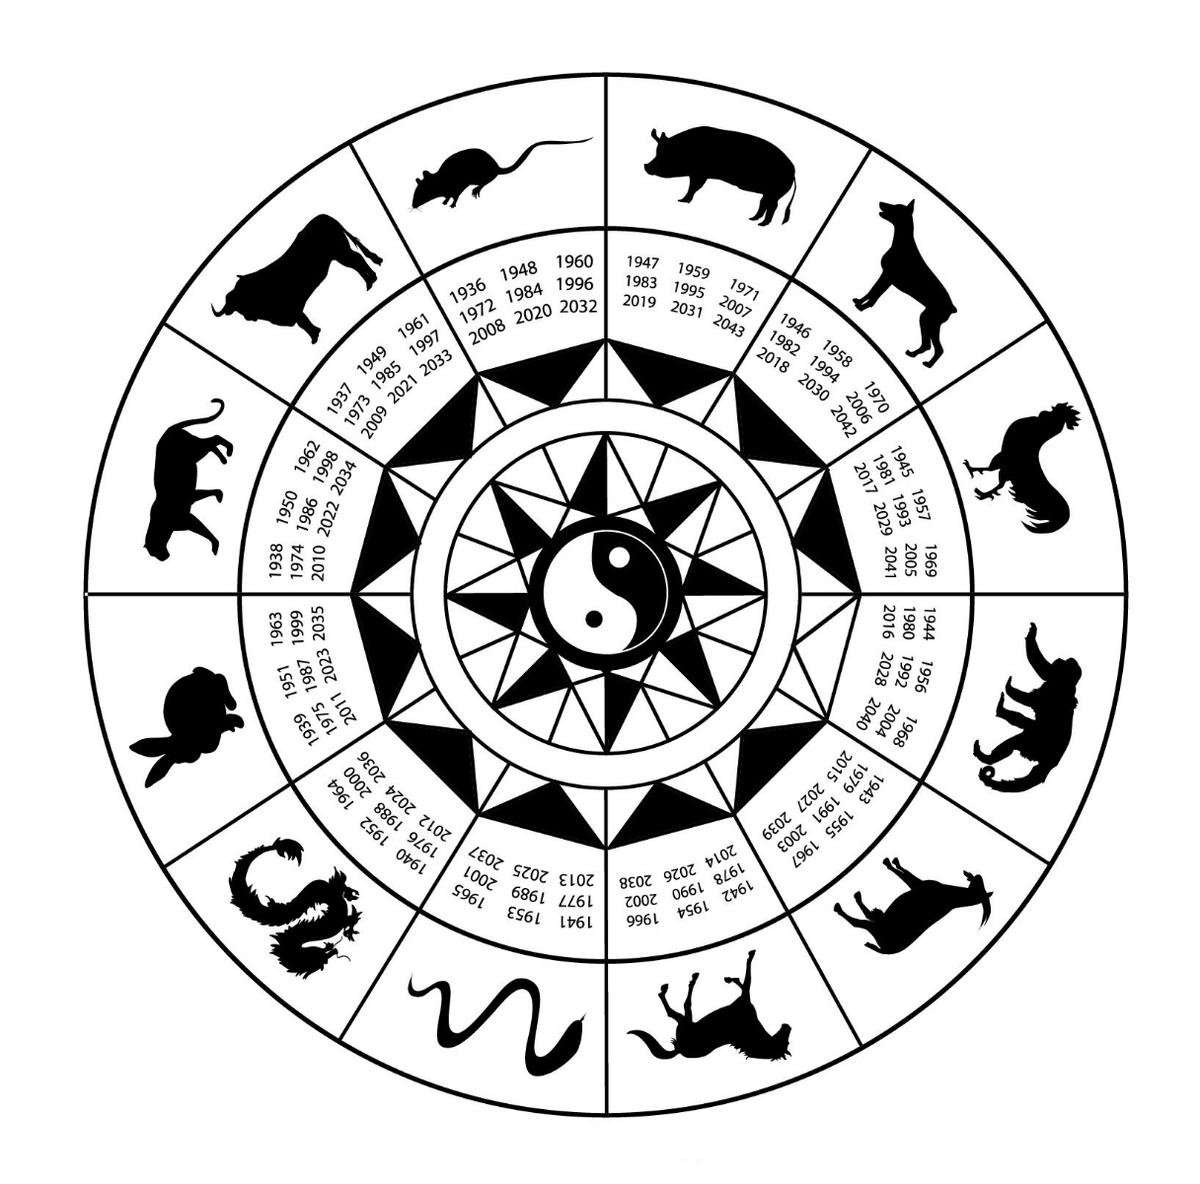 How to Get Along with the Different Lunar Zodiac Signs - Deepstash